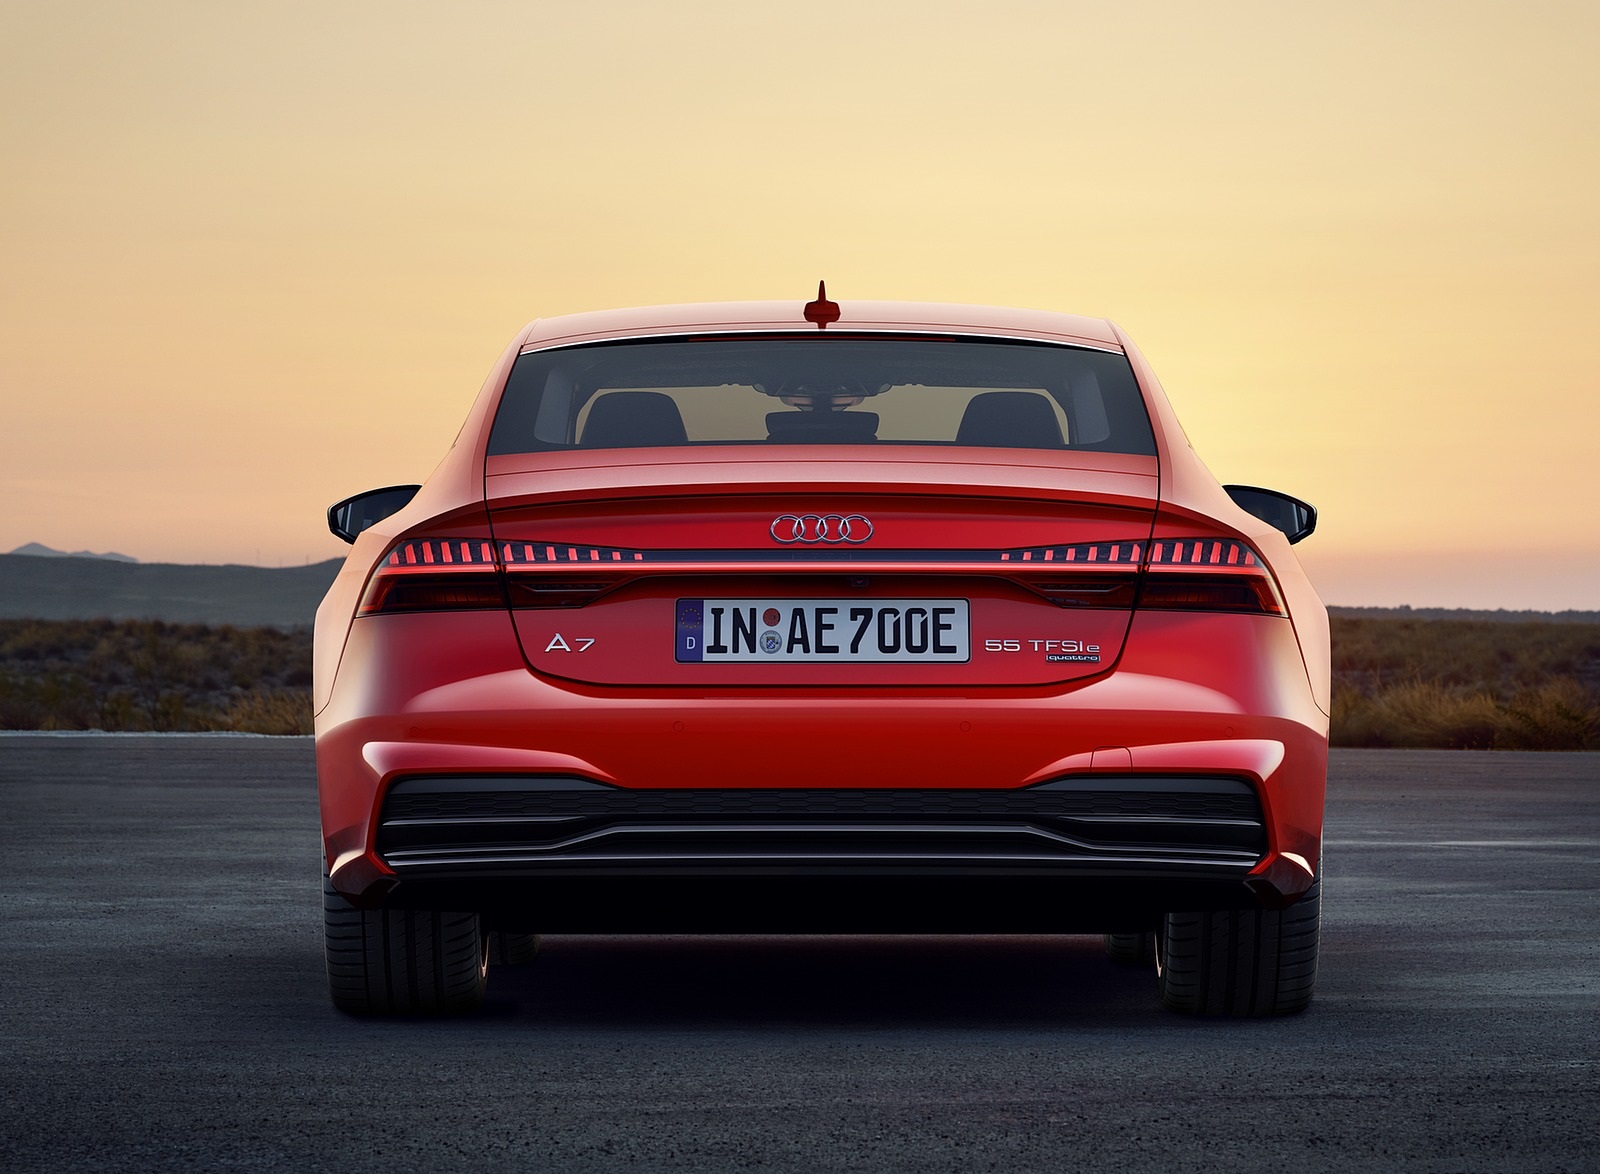 2020 Audi A7 Sportback 55 TFSI e quattro (Plug-In Hybrid Color: Tango Red) Rear Wallpapers #72 of 73